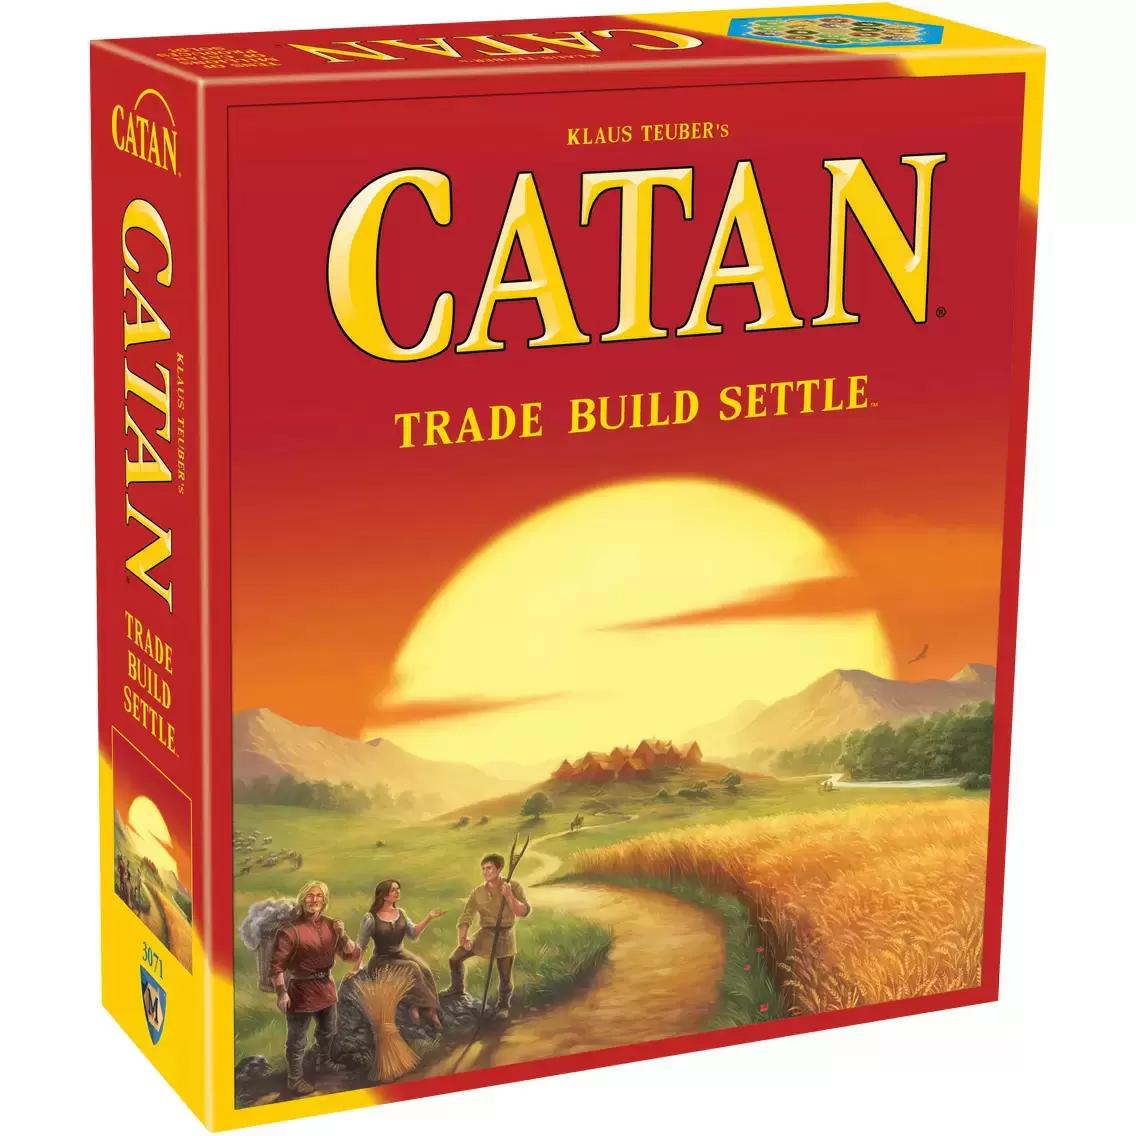 Settlers of Catan Board Game 5th Edition Expansion for $24.86